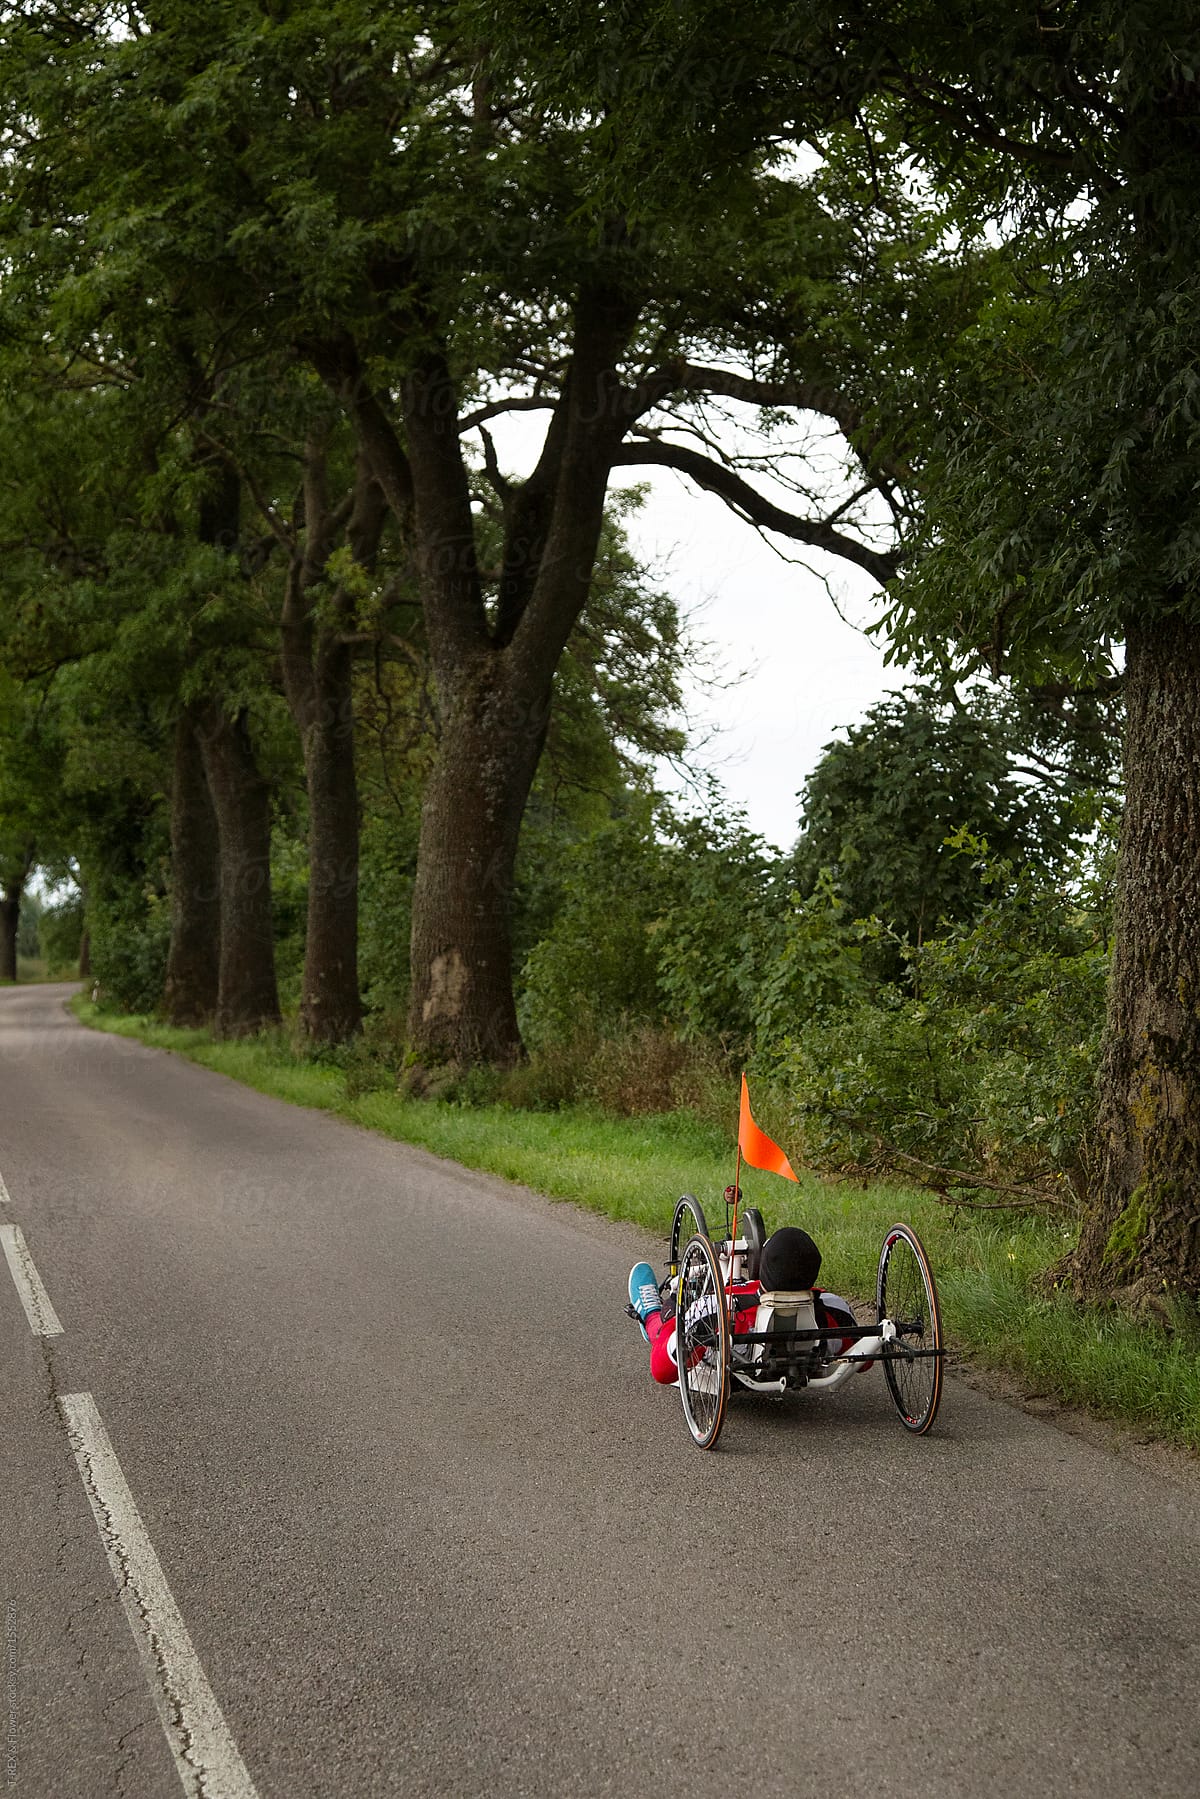 Handicapped man taking part in bicycle race